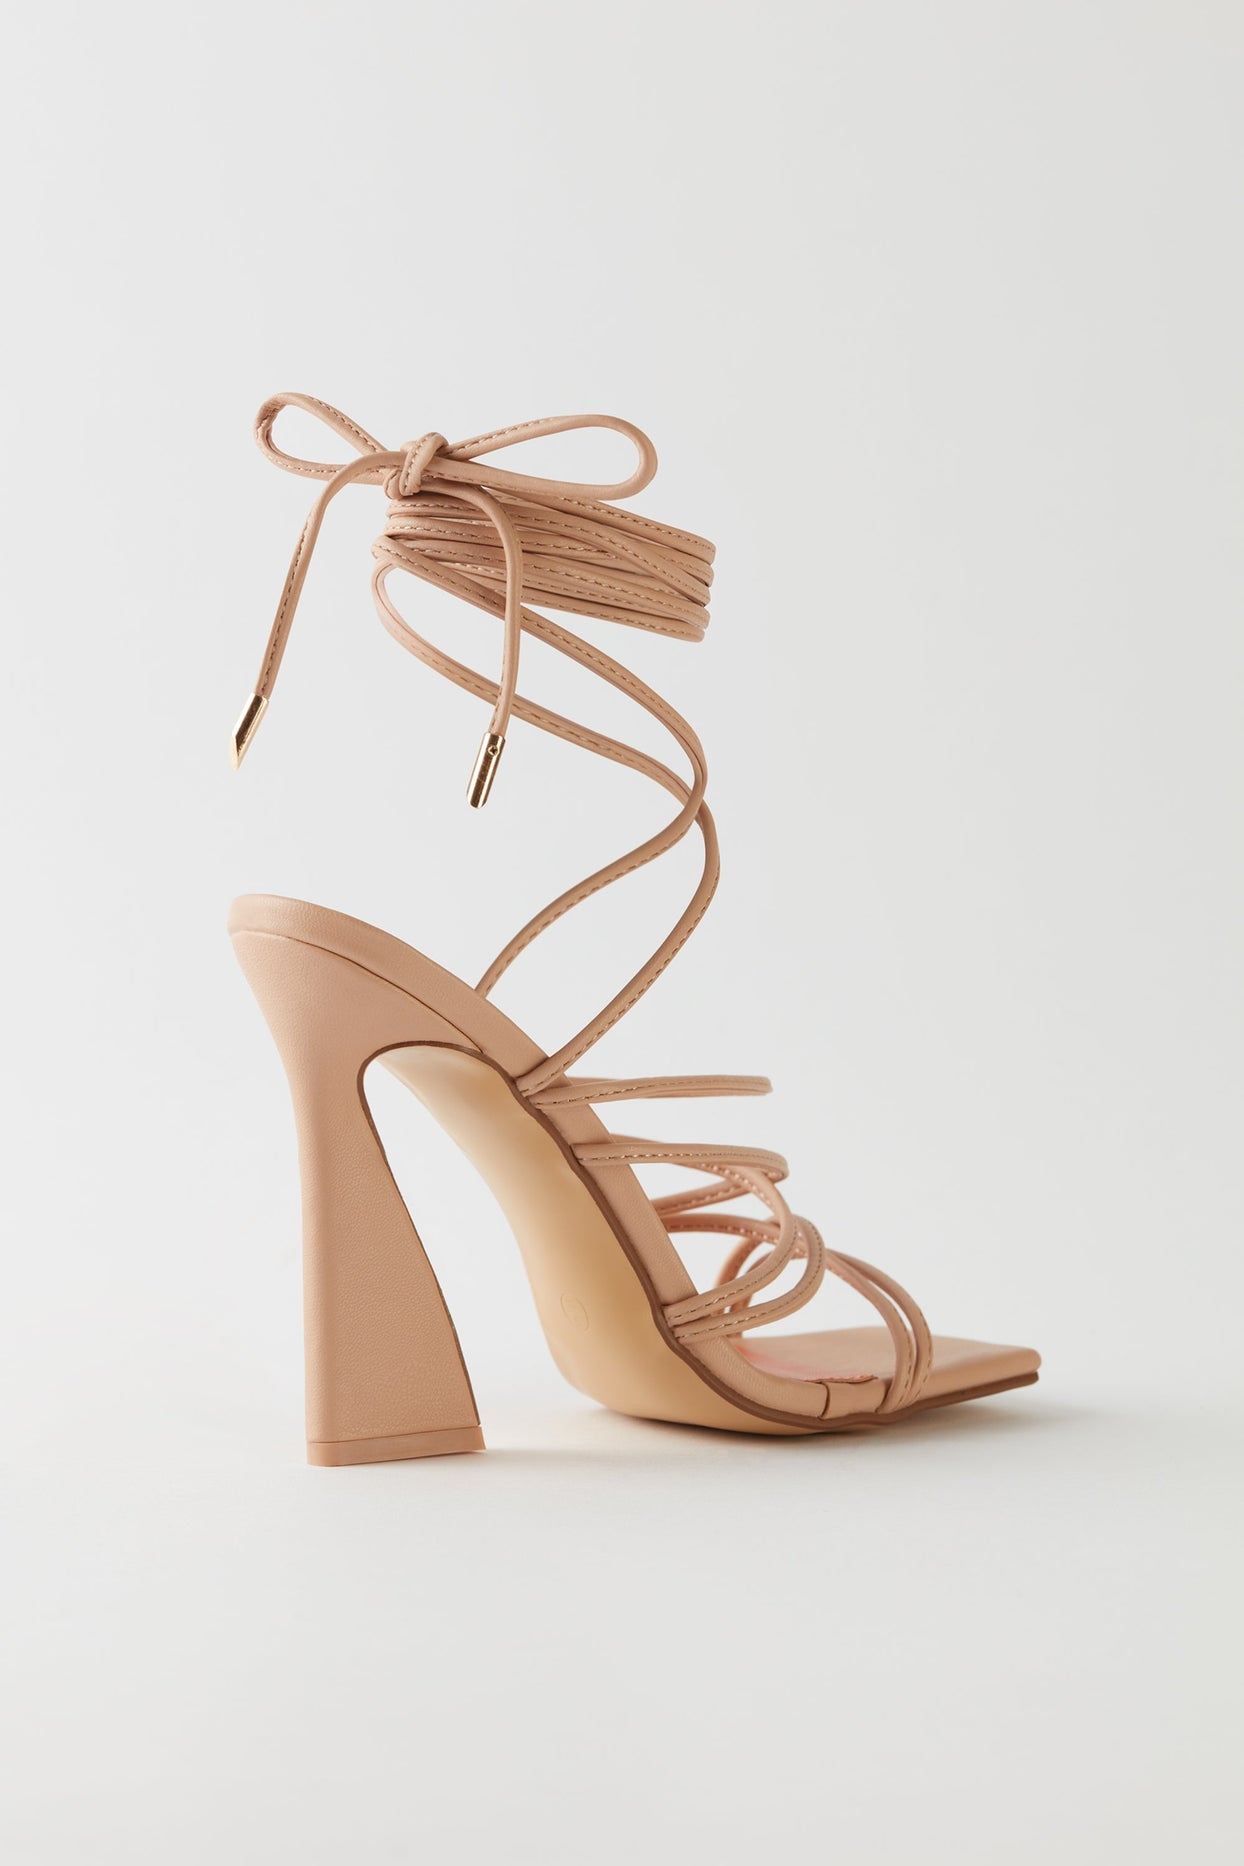 Leatherette Lace Up Heels in Nude